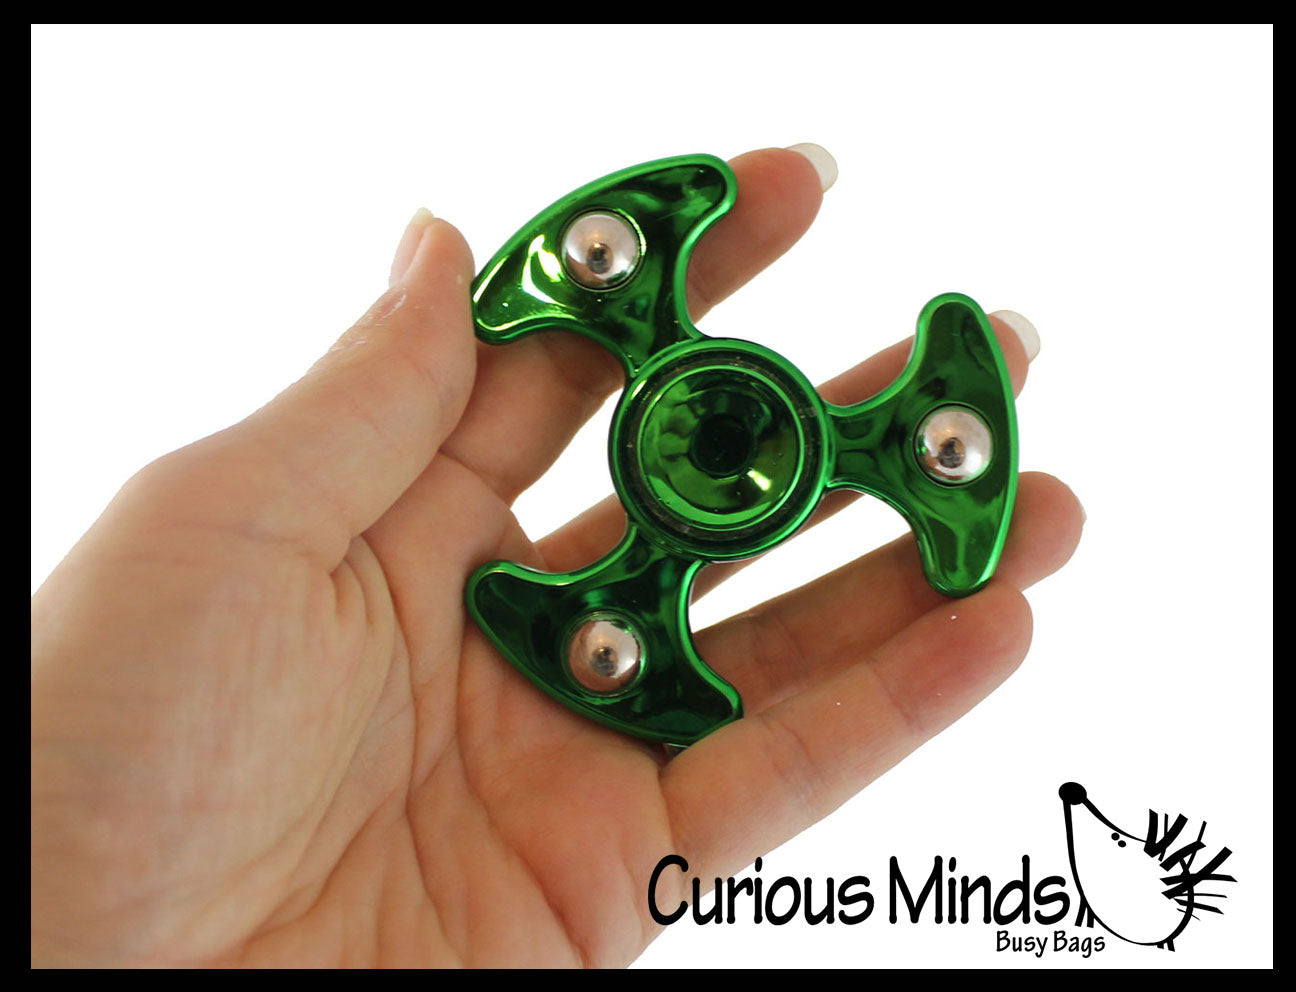 Metal Ninja Fidget Spinner Phone Game Stress Relief Toy For Autism